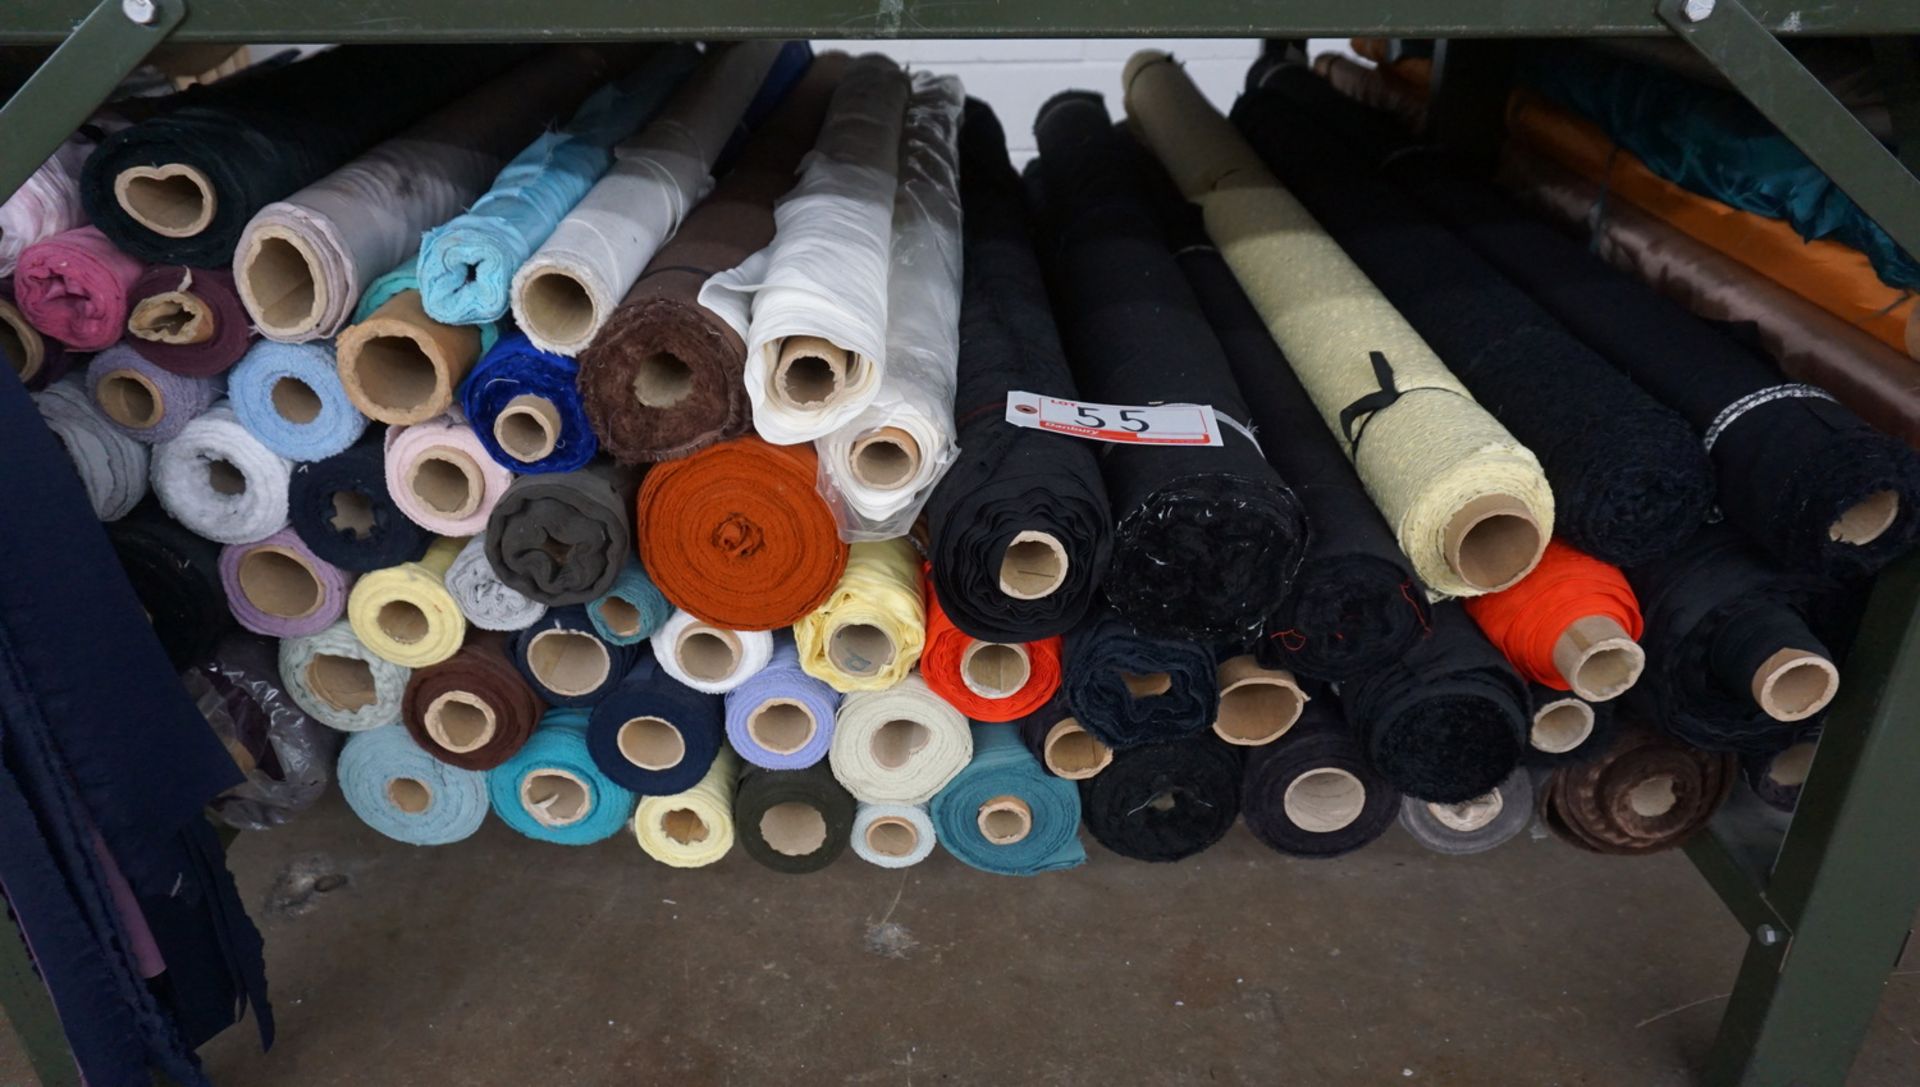 LOT - ASSORTED ROLLS OF FABRIC, POLYESTER, COTTON (62 ROLLS)